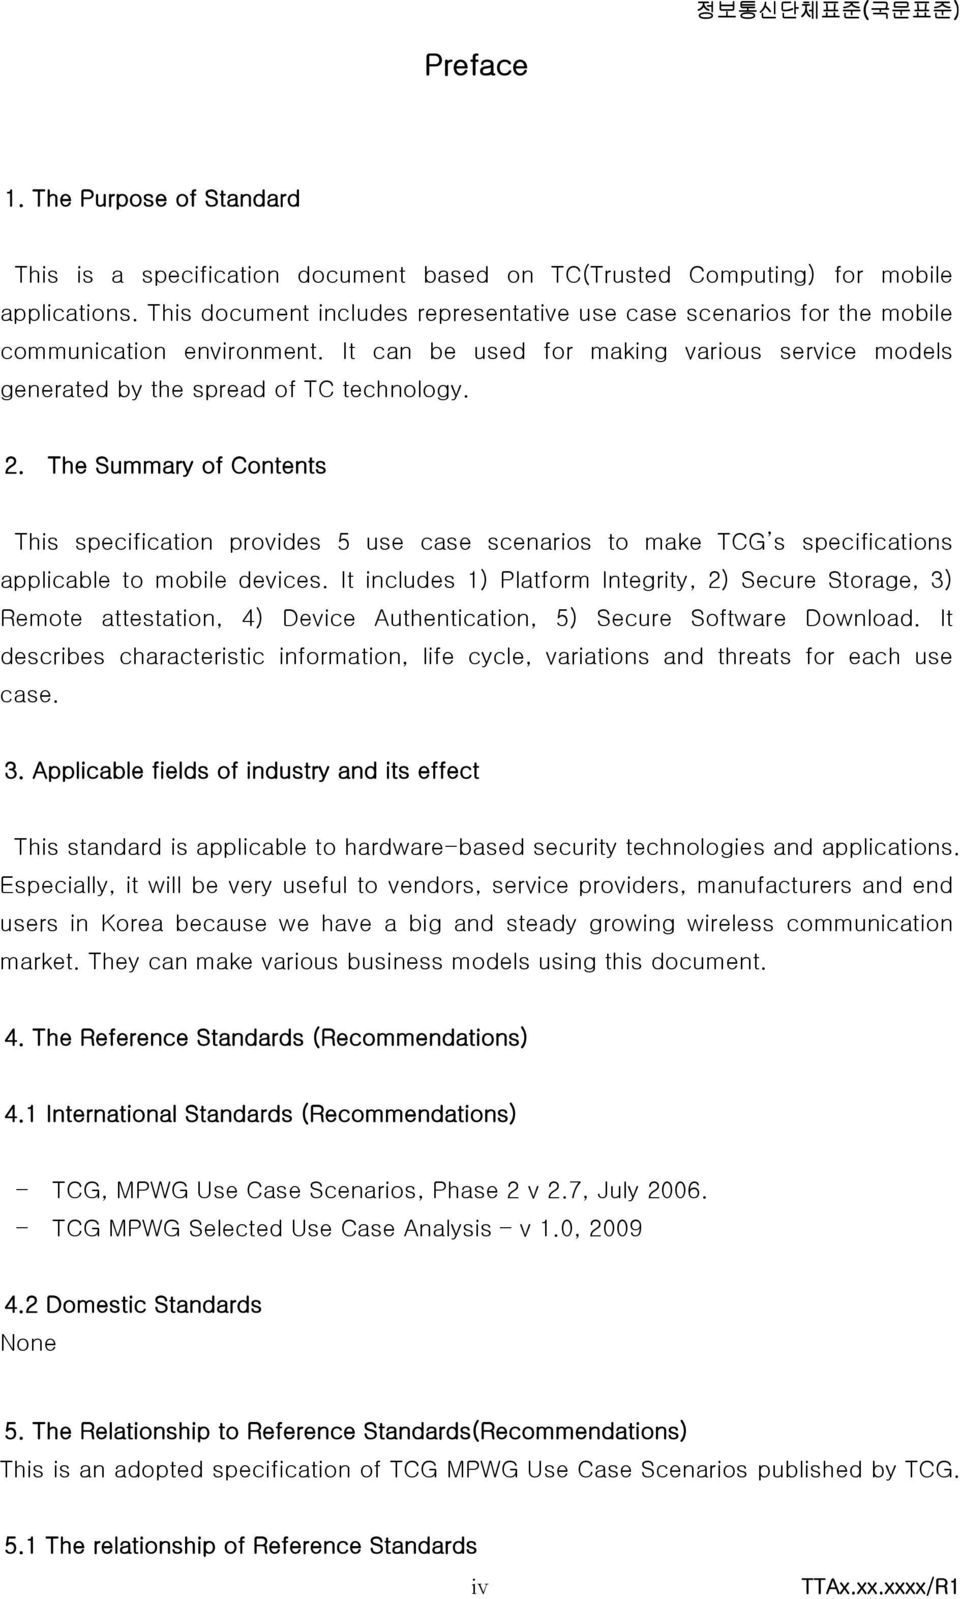 The Summary of Contents This specification provides 5 use case scenarios to make TCG s specifications applicable to mobile devices.